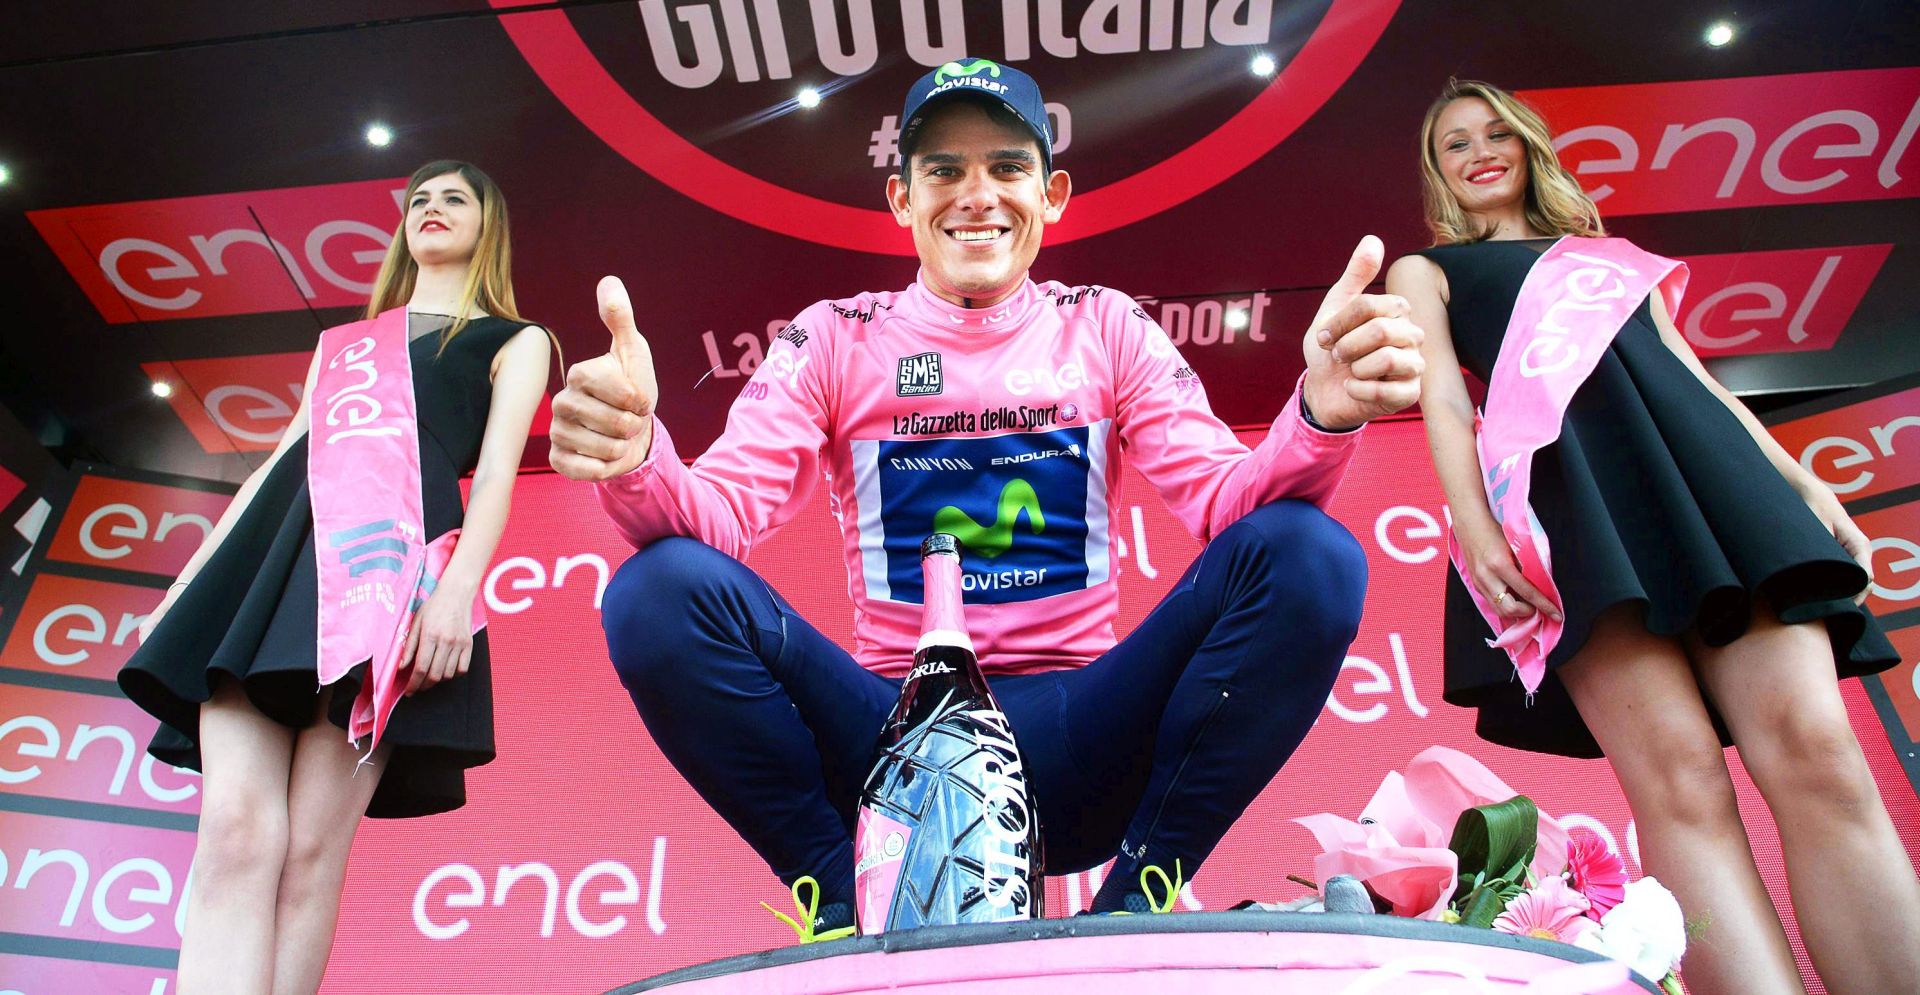 epa05319670 Costa Rican rider Andrey Amador (C) of the Movistar Team celebrates on the podium wearing the overall leader's pink jersey after the 13th stage of the Giro d'Italia cycling race over 170km from Palmanova to Cividale del Friuli, Italy, 20 May 2016.  EPA/LUCA ZENNARO